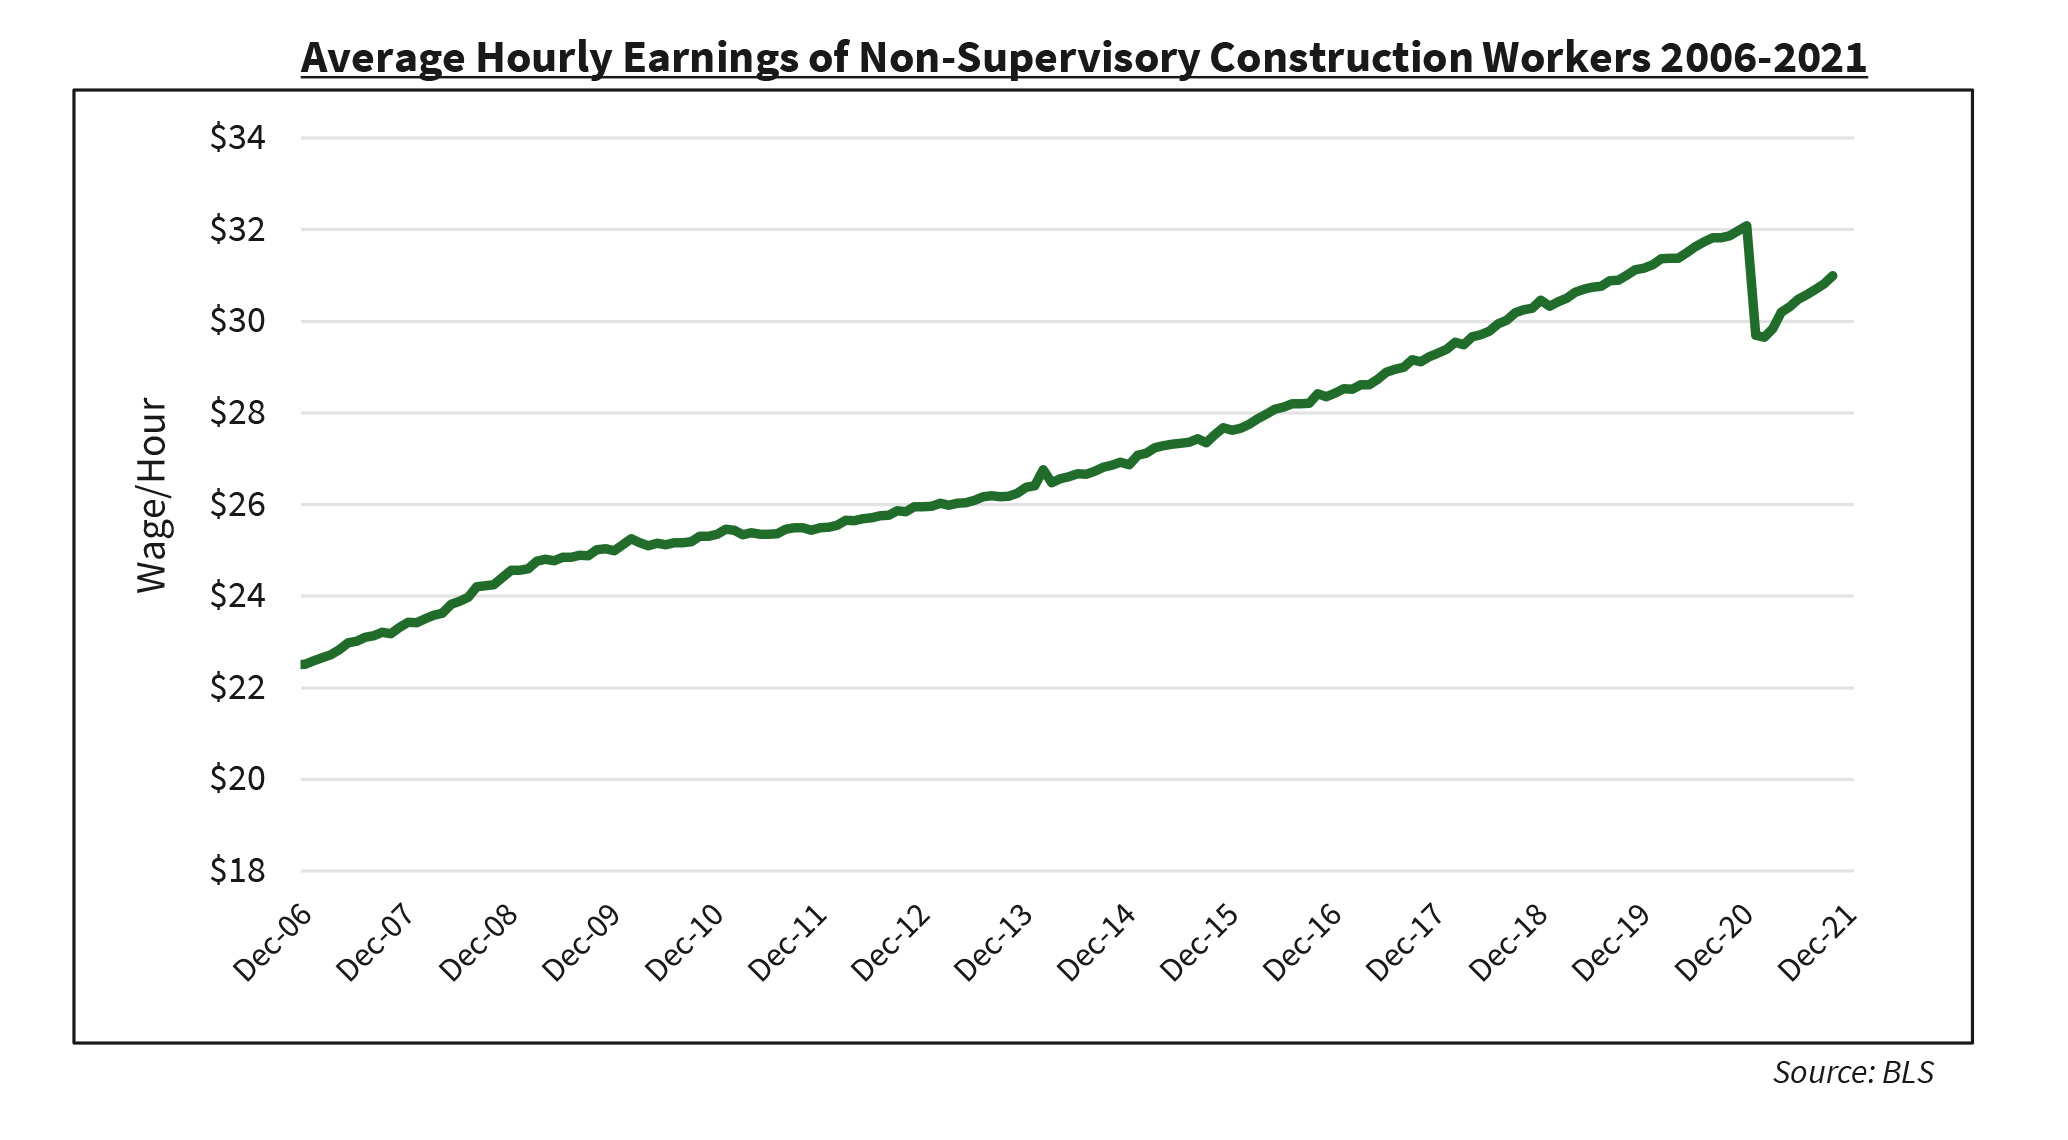 Average Hourly Earnings of Non-Supervisory Construction Workers 2006-2021